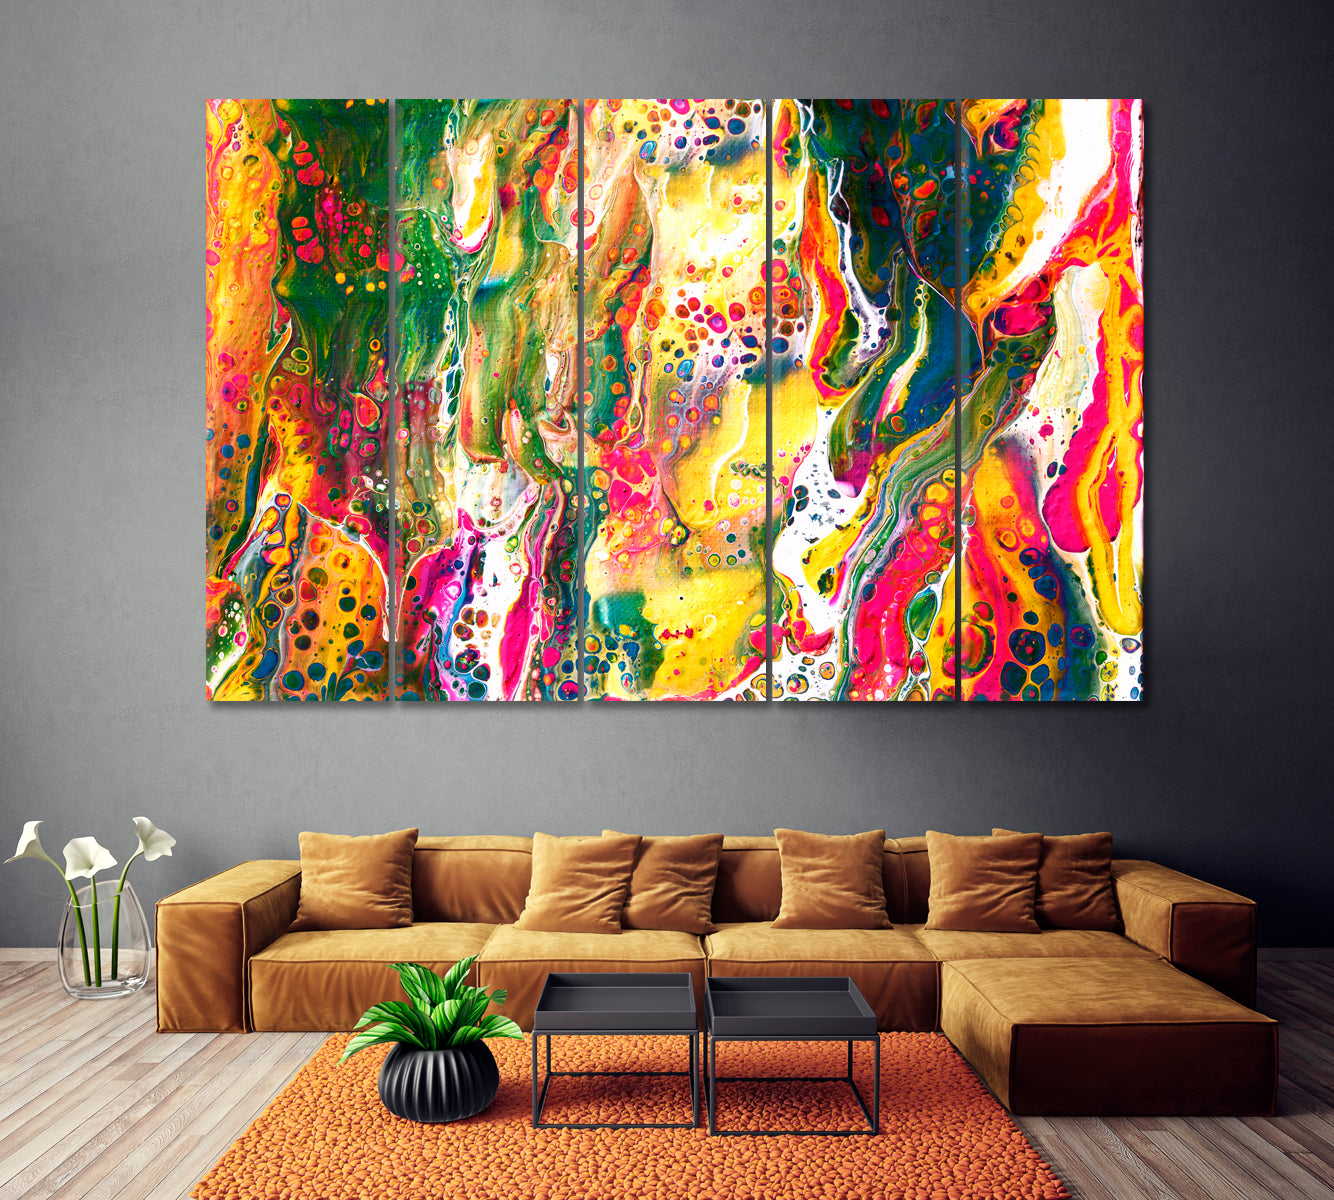 Abstract Multicolor Liquid Ink Pattern Canvas Print ArtLexy 5 Panels 36"x24" inches 